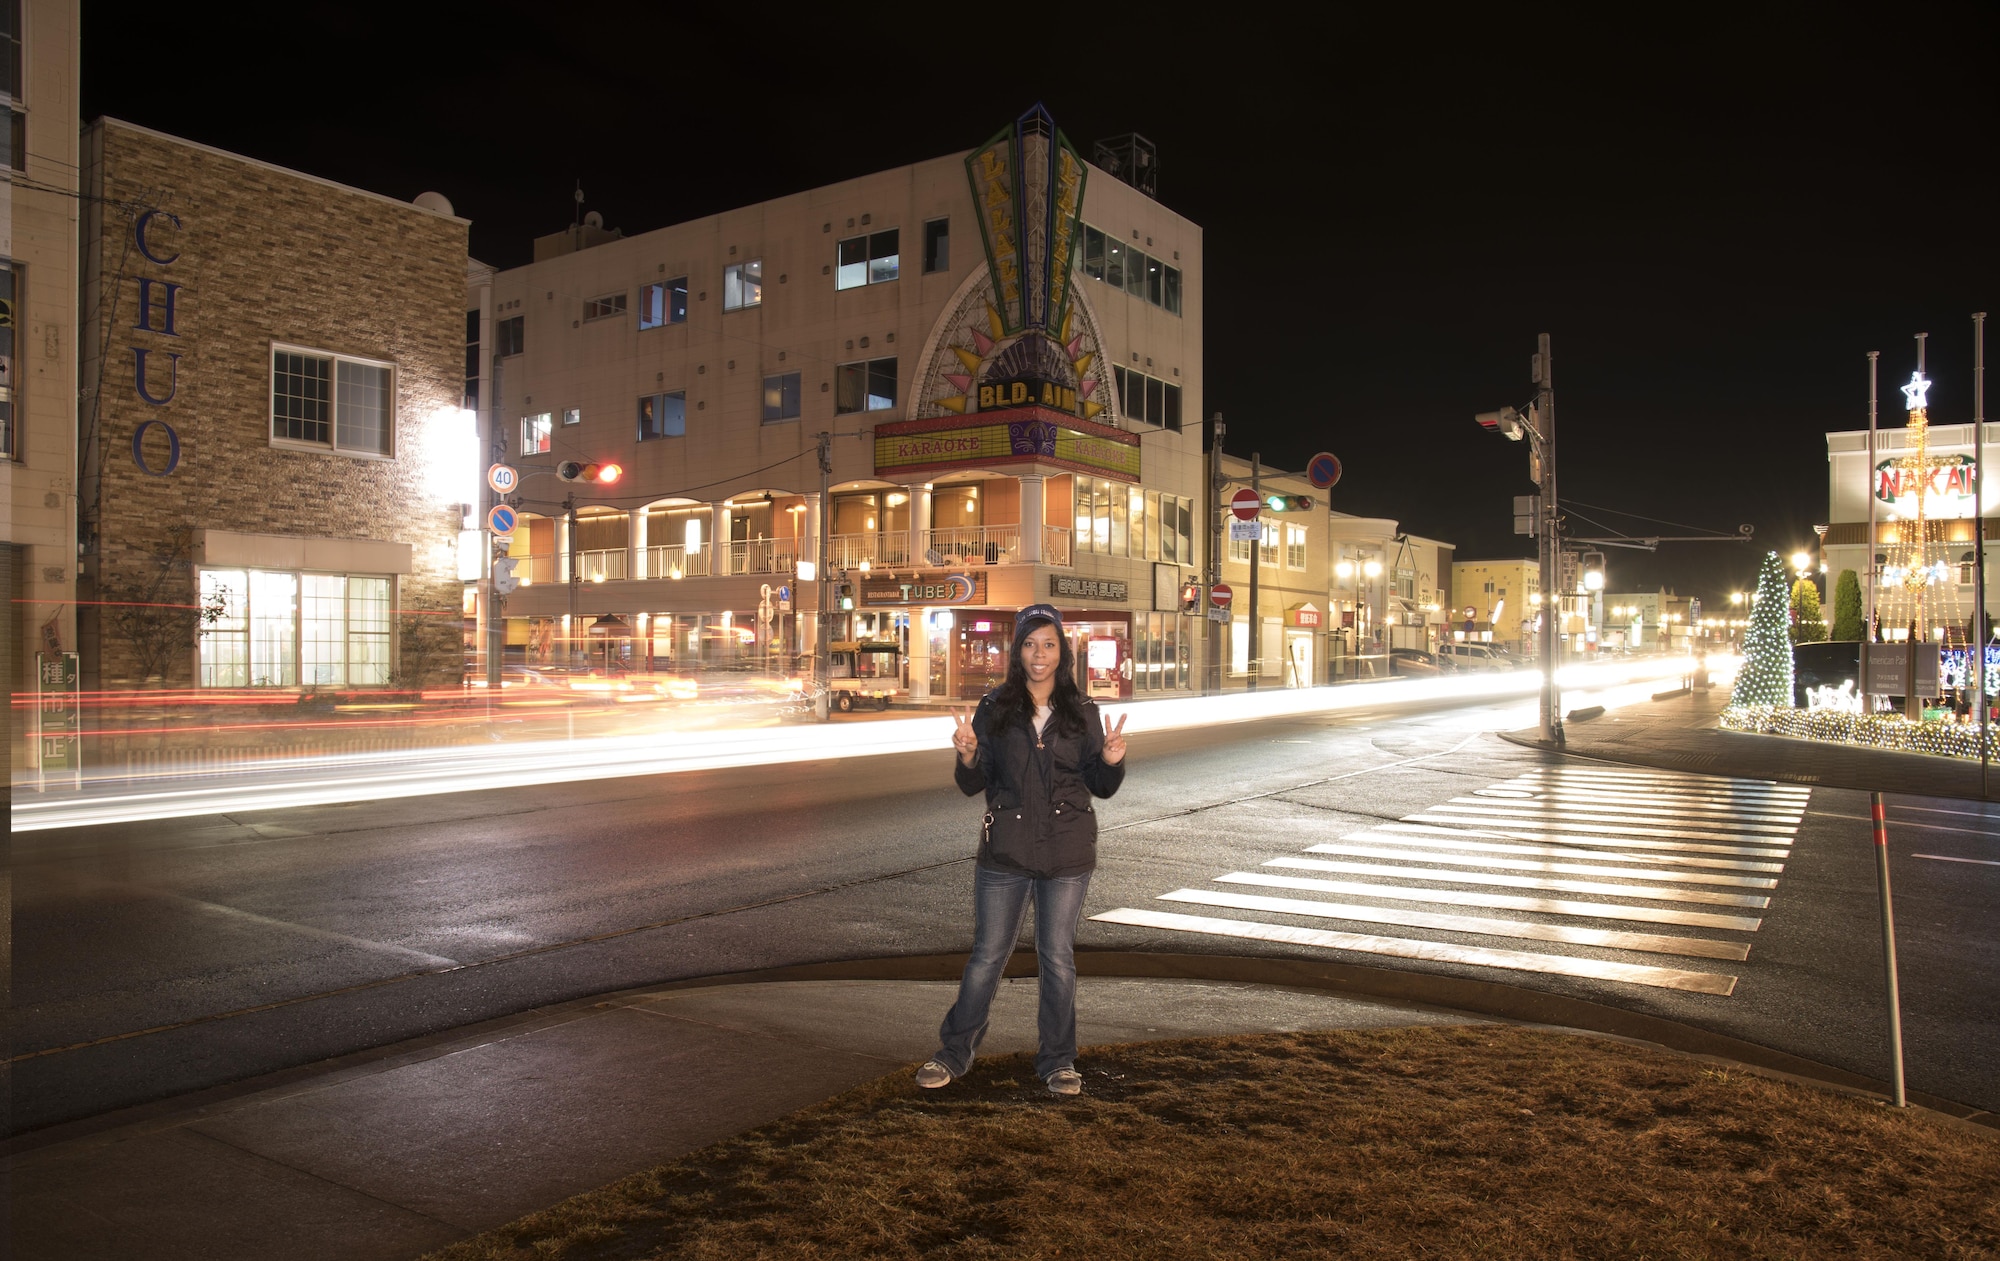 U.S. Air Force Airman 1st Class Sadie Colbert, a 35th Fighter Wing public affairs photojournalist, poses for a photo in Misawa City, Japan, Dec. 1, 2016. Getting out and exploring provides opportunities to meet Japanese locals and discover the various festivals, activities and food joints, making life an adventure during the holiday season. (U.S. Air Force photo by Senior Airman Brittany Chase)